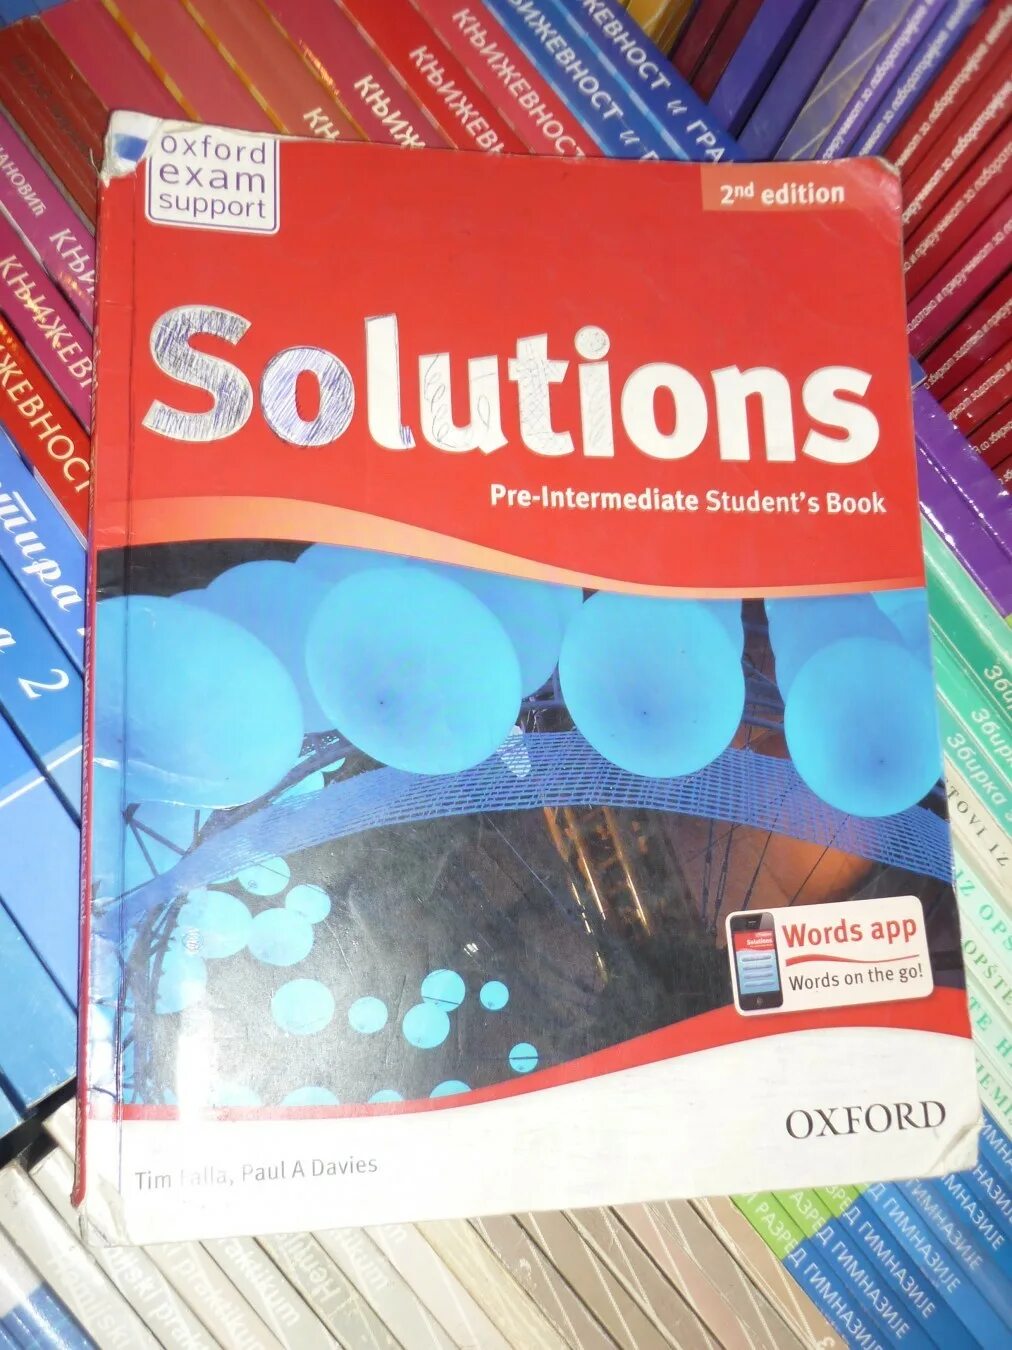 Solutions intermediate student s book ответы. Солюшенс 2nd Edition pre Intermediate. Solutions pre-Intermediate student's book. Solutions pre-Intermediate student's book пдф. Solutions pre-Intermediate Workbook Audio 1.03.